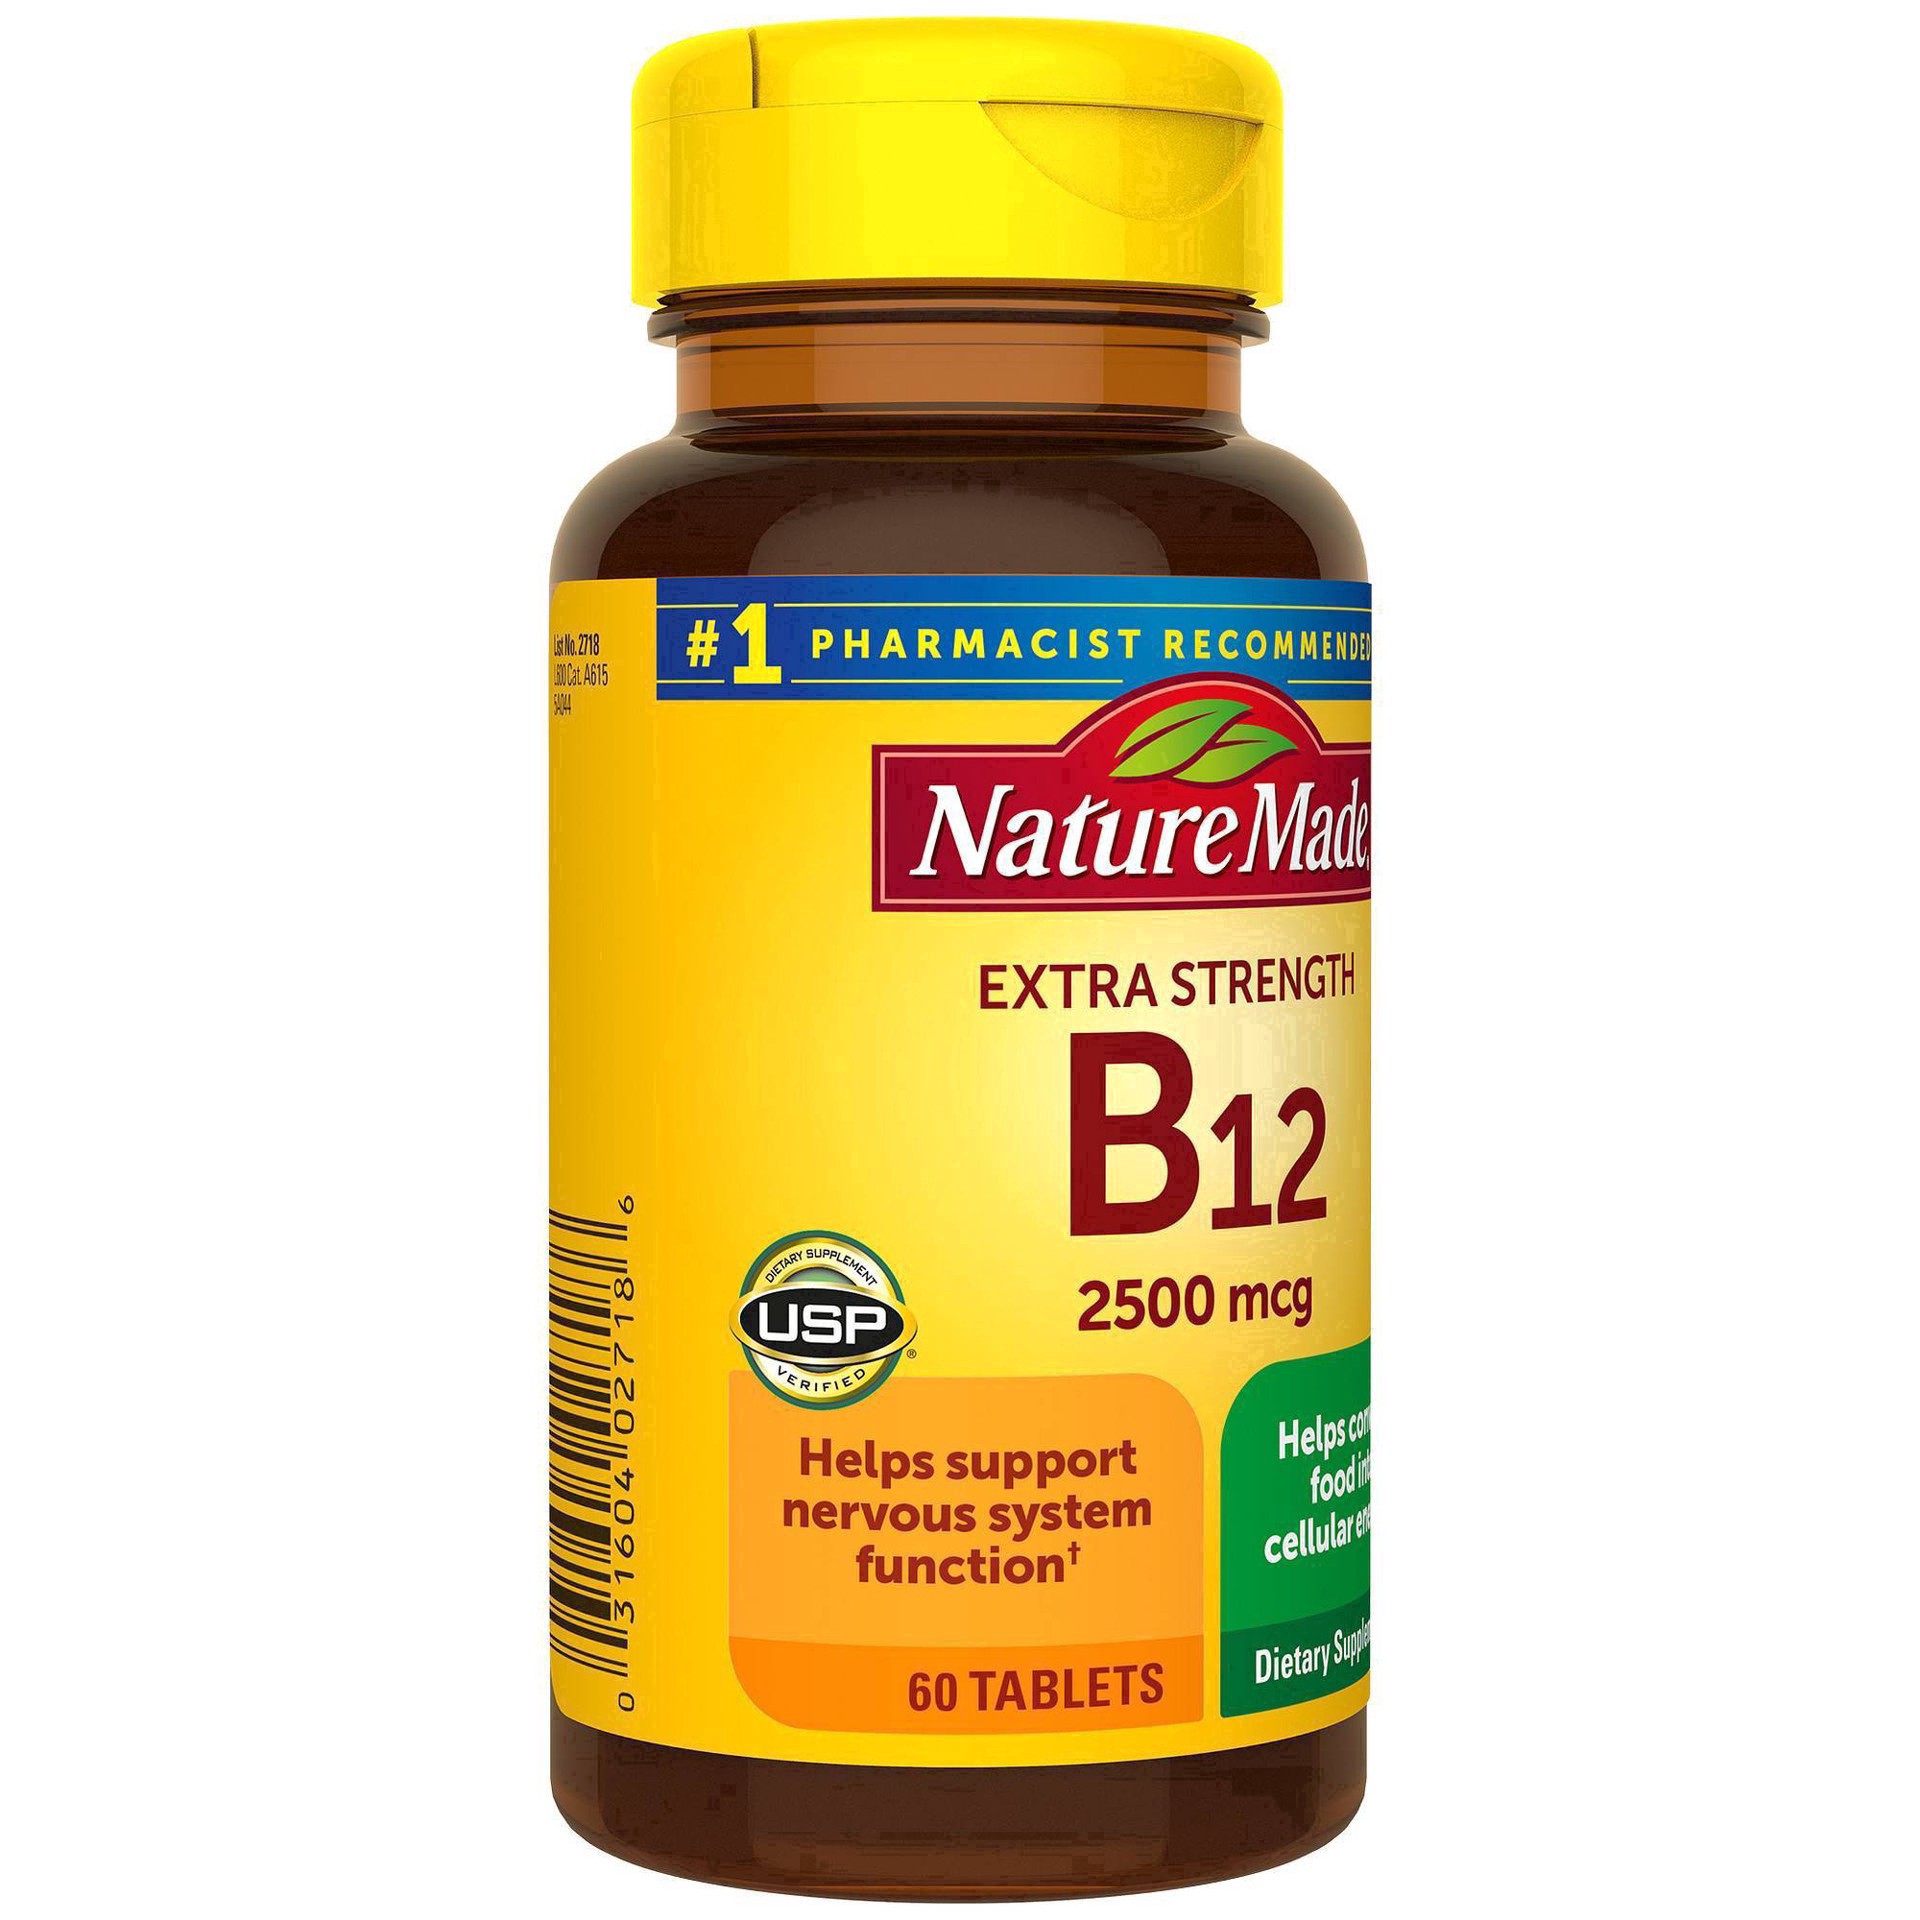 slide 44 of 60, Nature Made Extra Strength Vitamin B12 2500 mcg Tablets for Energy Metabolism Support - 60ct, 60 ct